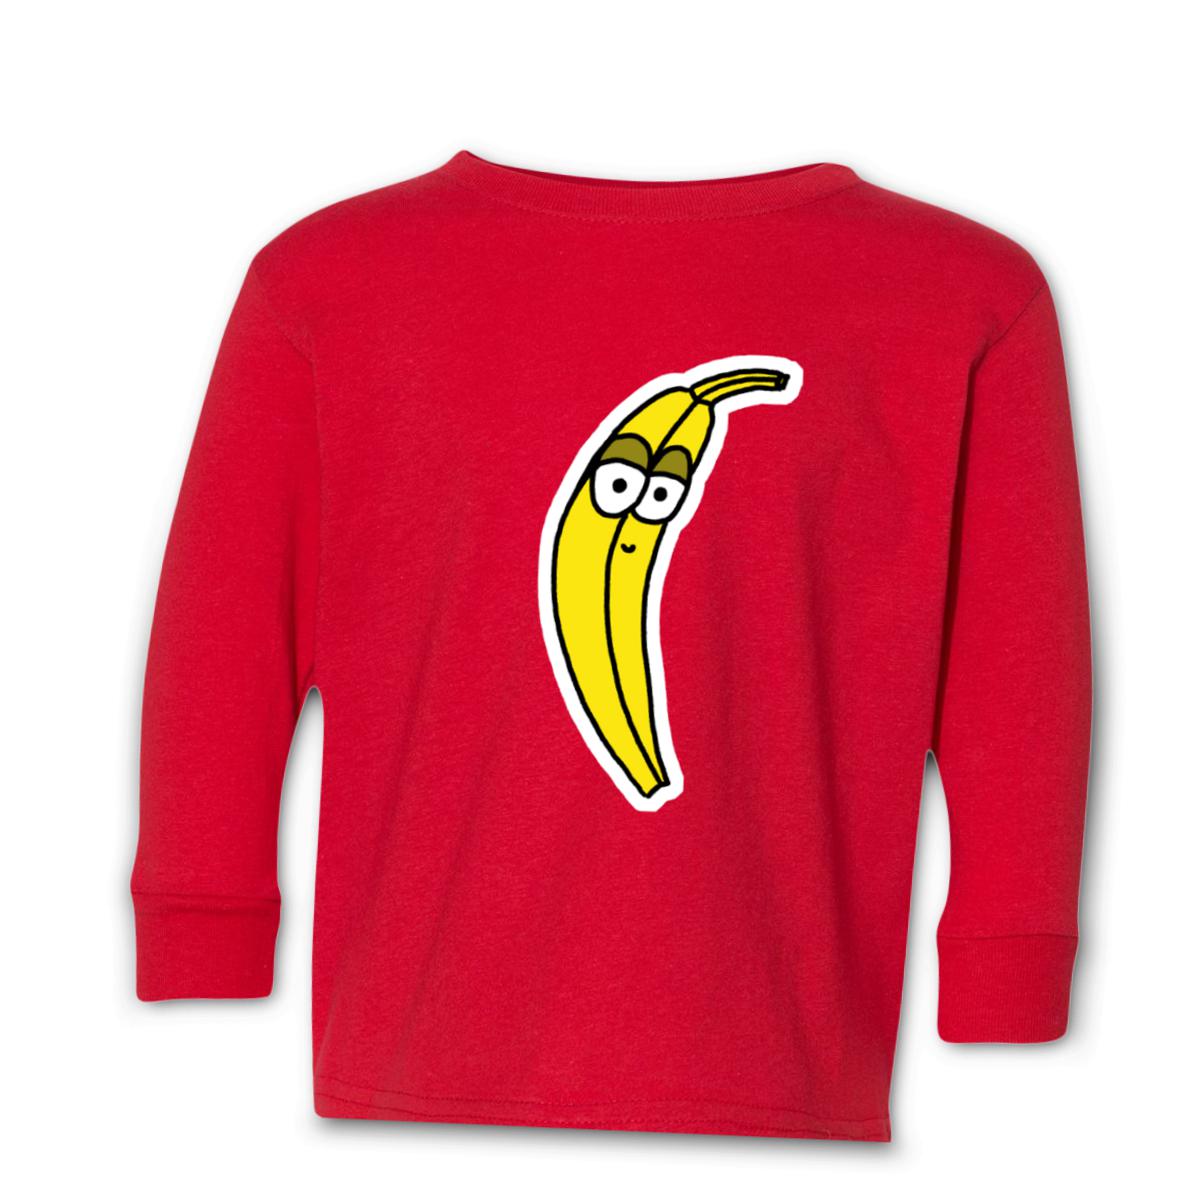 Plantain Toddler Long Sleeve Tee 4T red